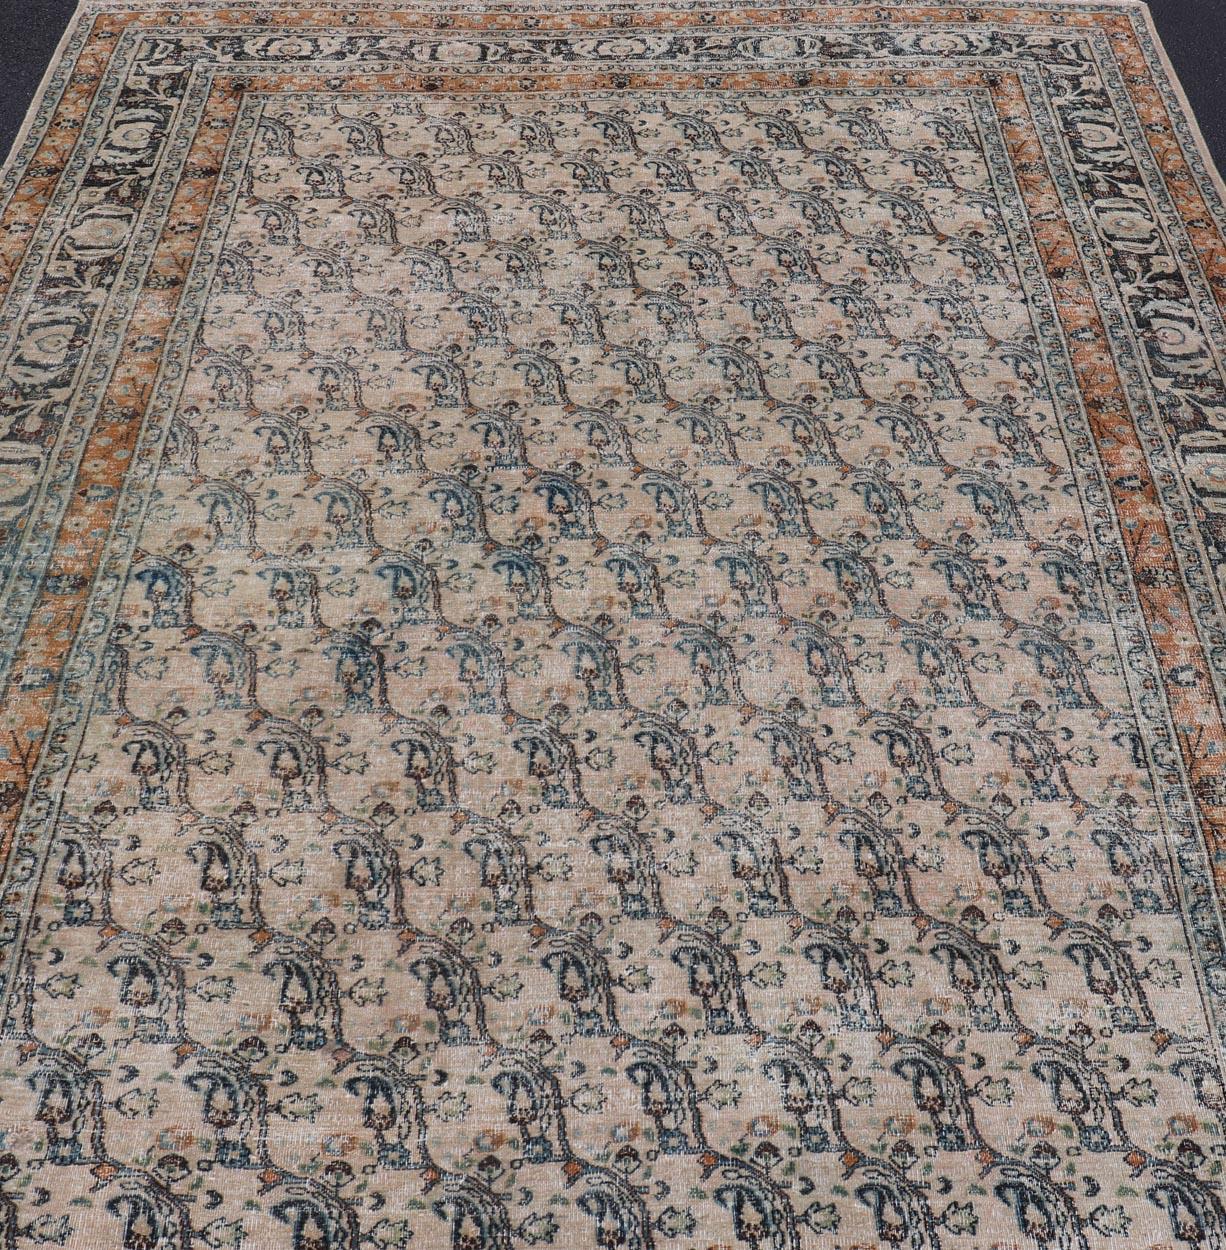 Khorassan Antique N.E Persian Khorasan Rug In Diagonal Paisley Design with Gray & Sand For Sale